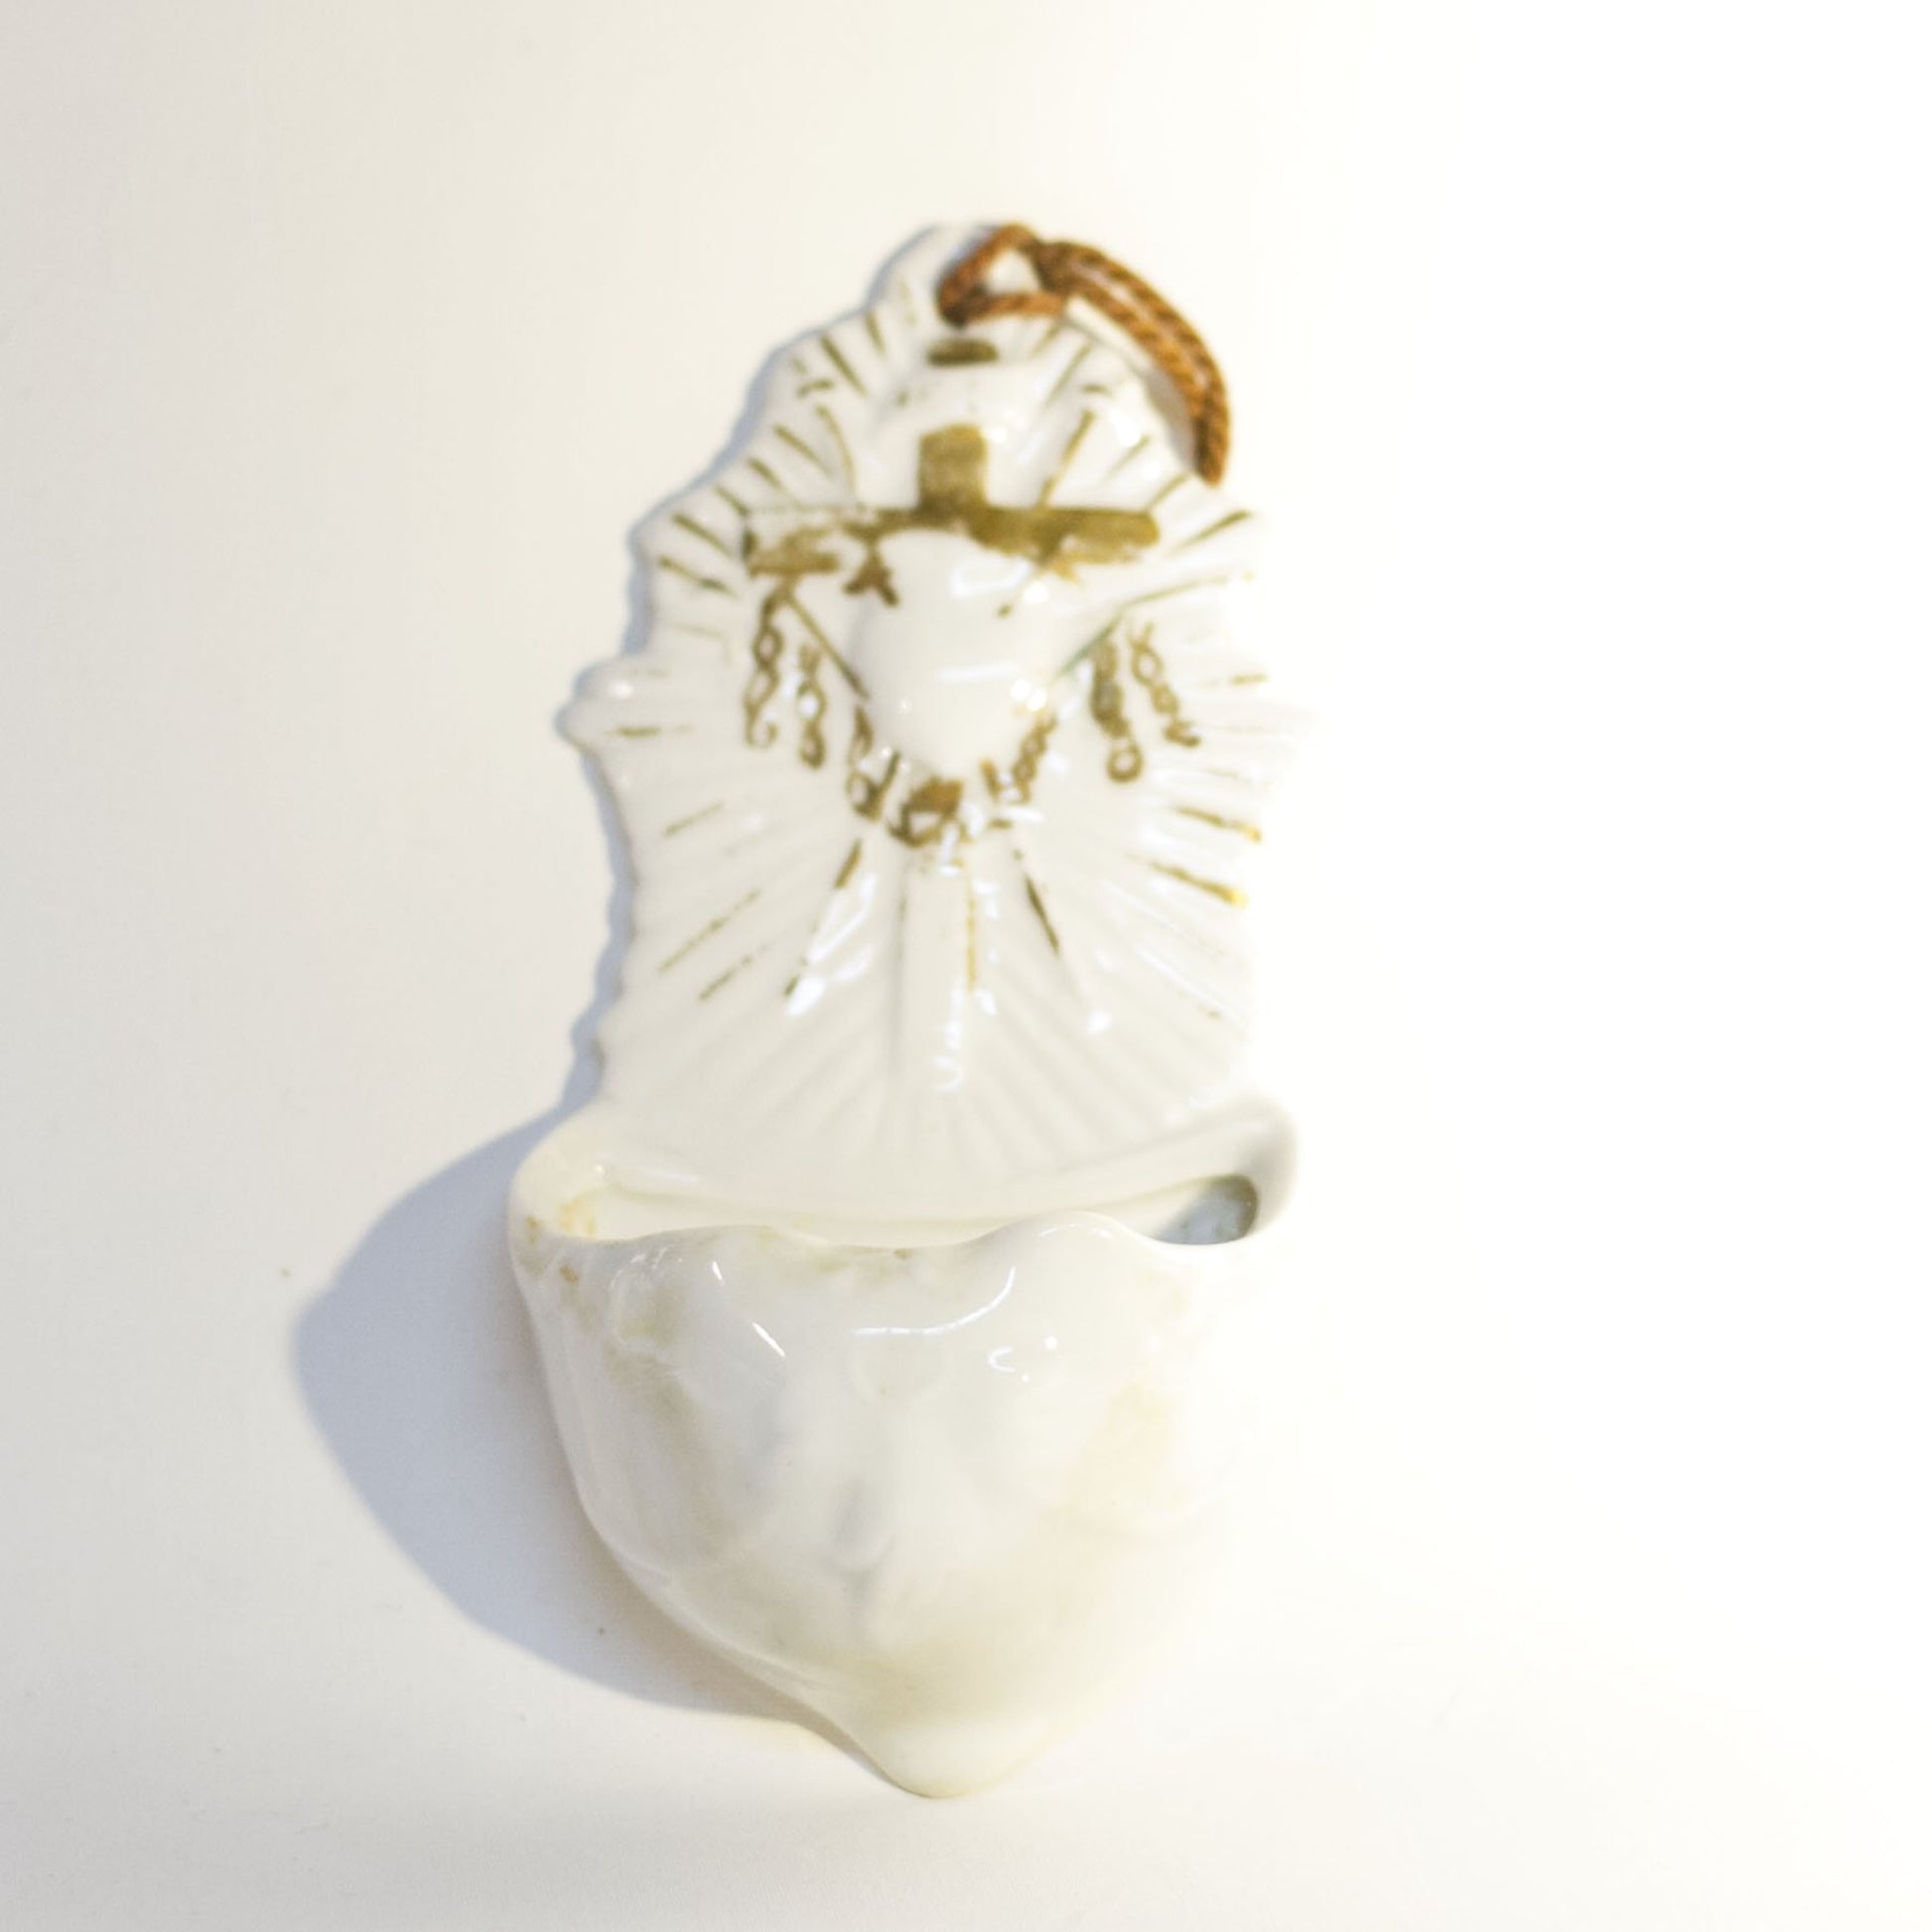 Vintage HOLY WATER FONT Depicting SACRED HEART, CROSS and CHAINS White Glazed Bisque with Hand-Painted Gold Gilt